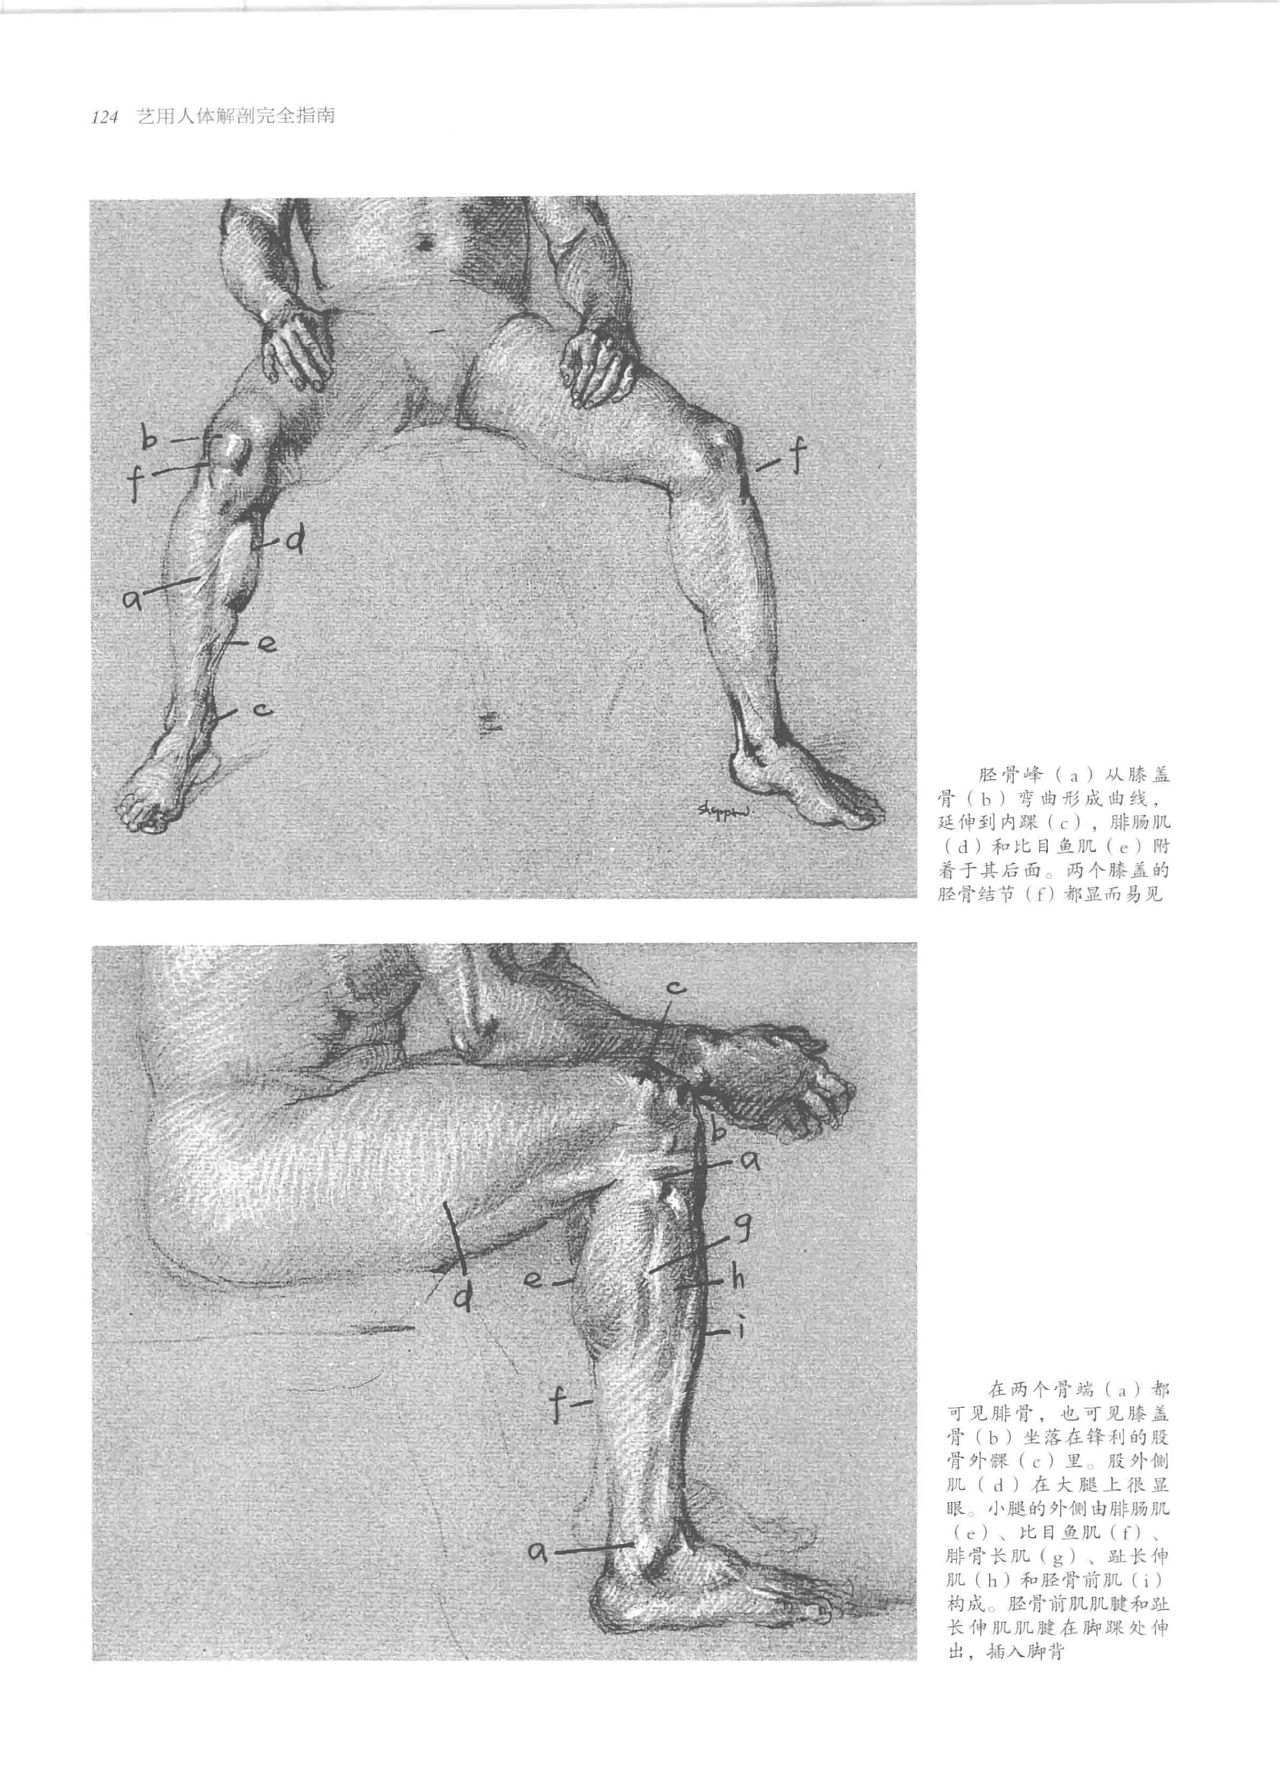 Anatomy-A Complete Guide for Artists - Joseph Sheppard [Chinese] 124